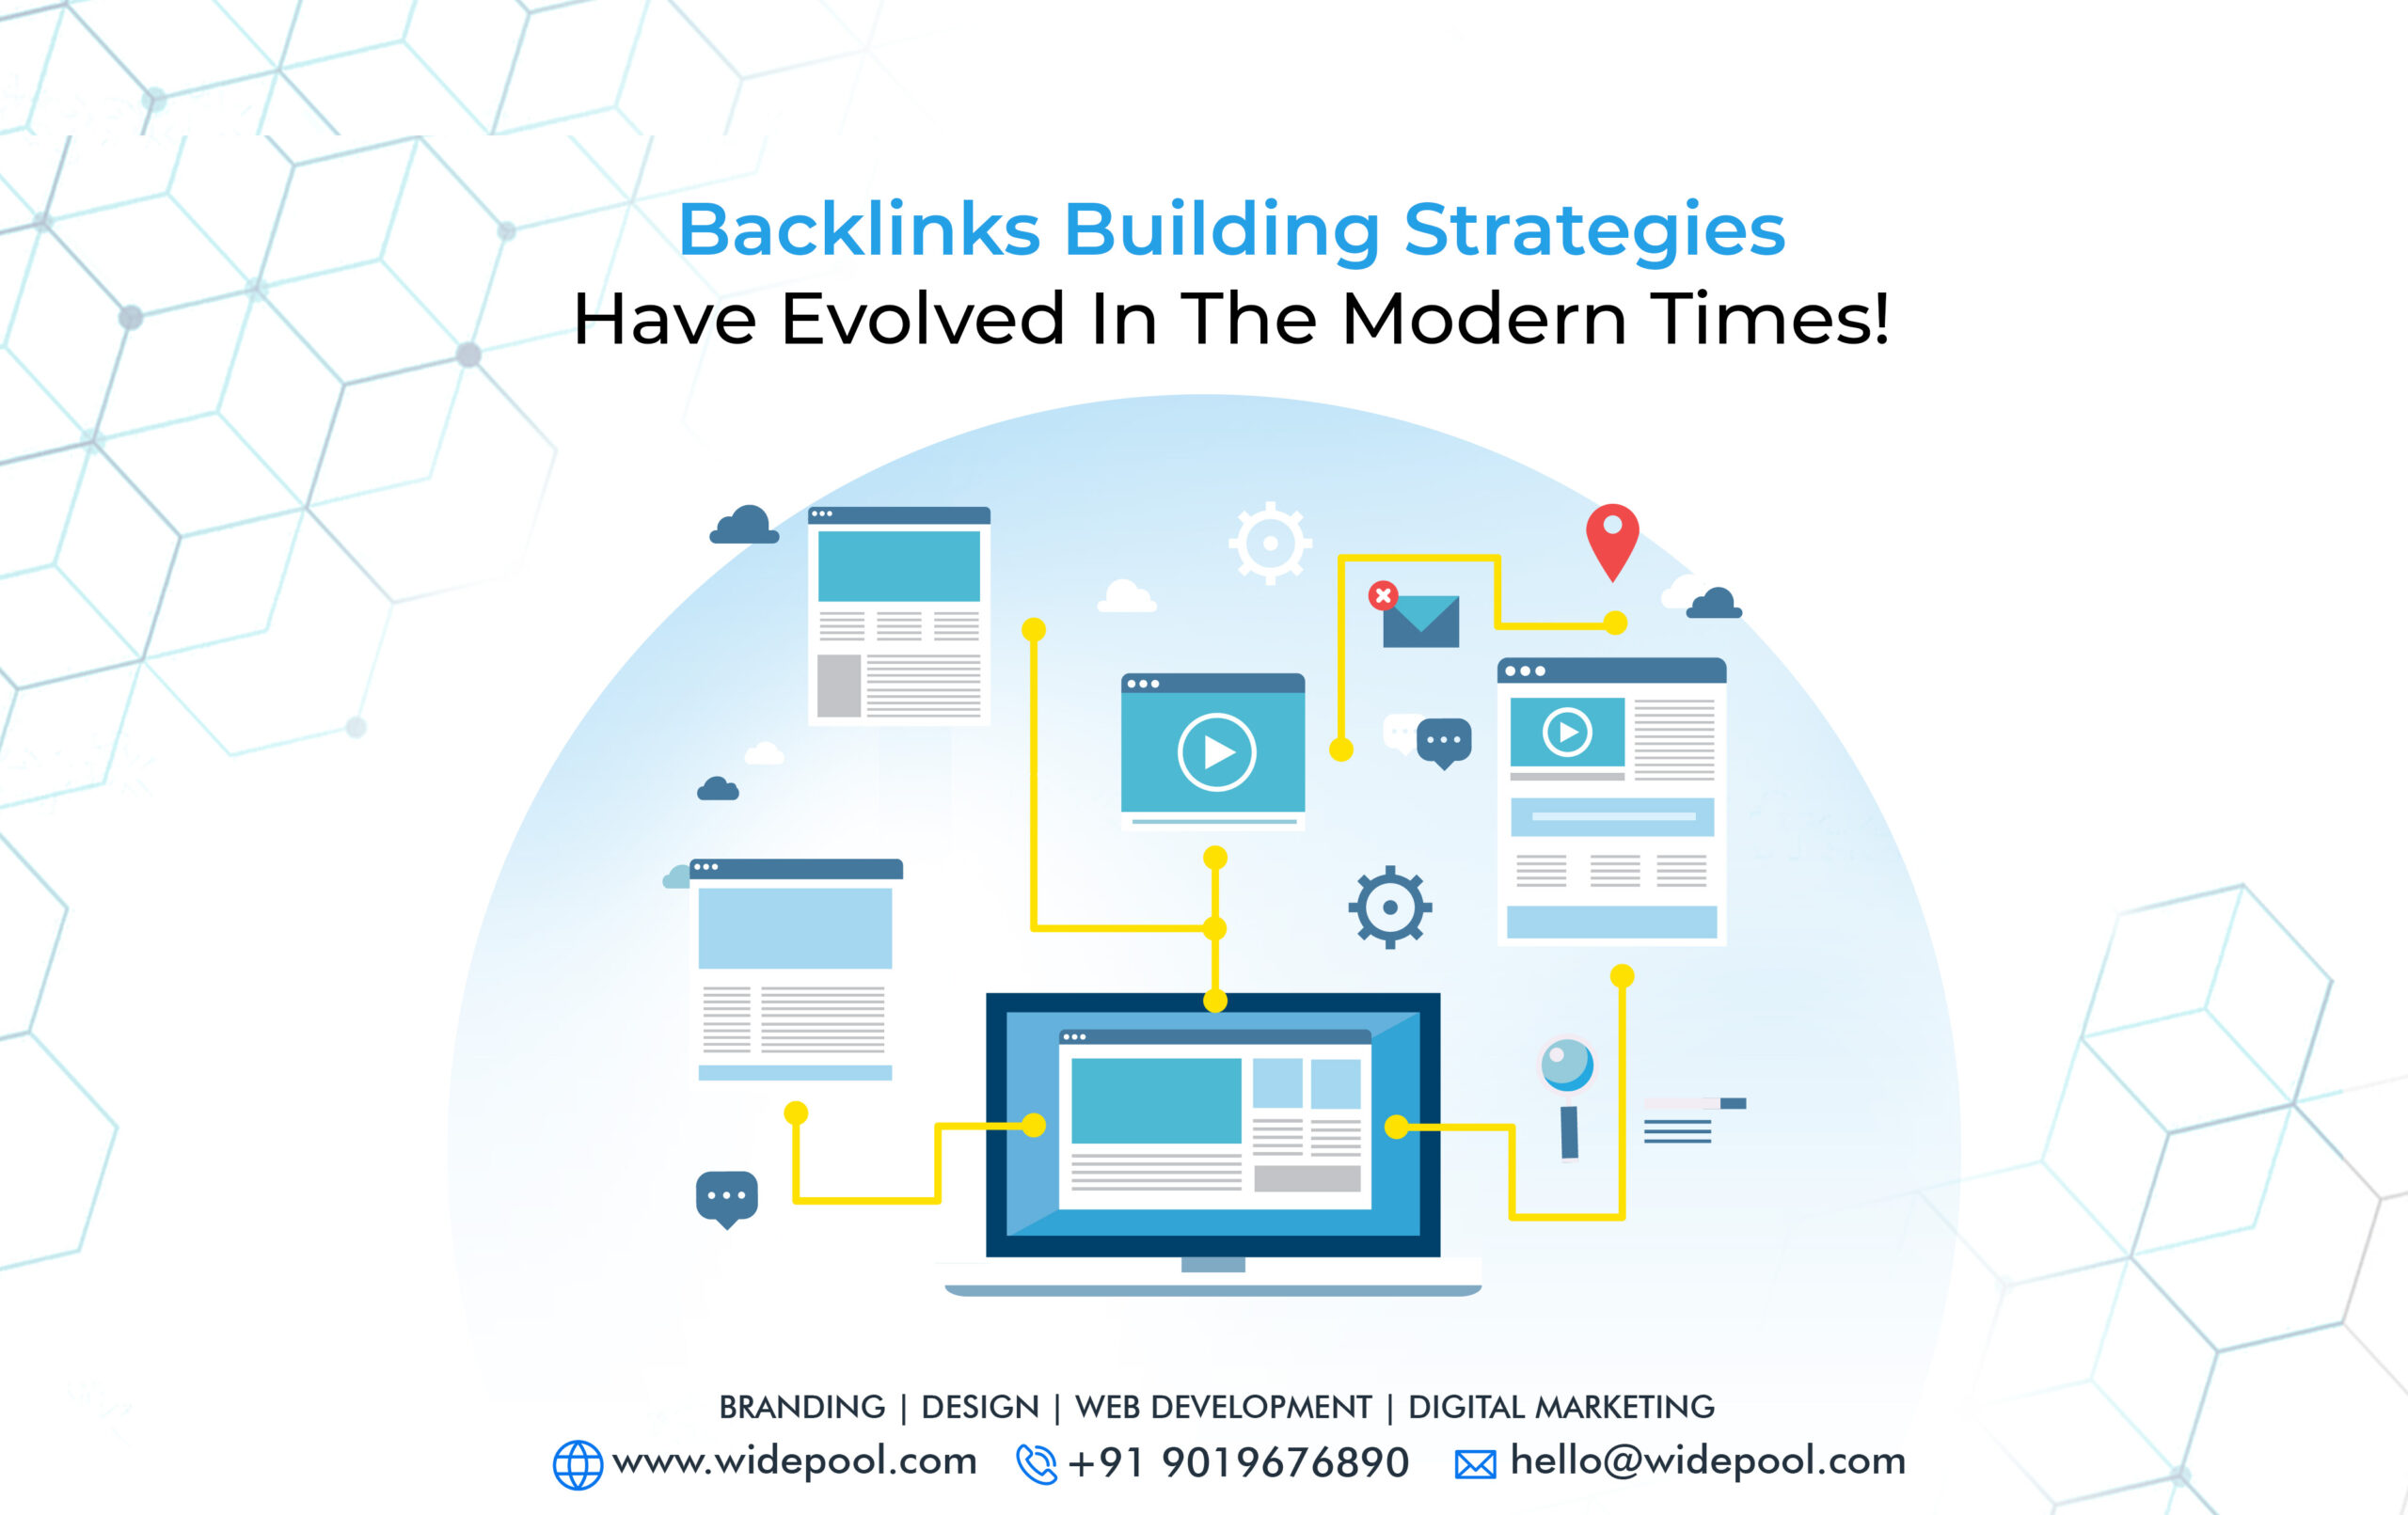 Backlinks Building Strategies Have Evolved in the Modern Times!